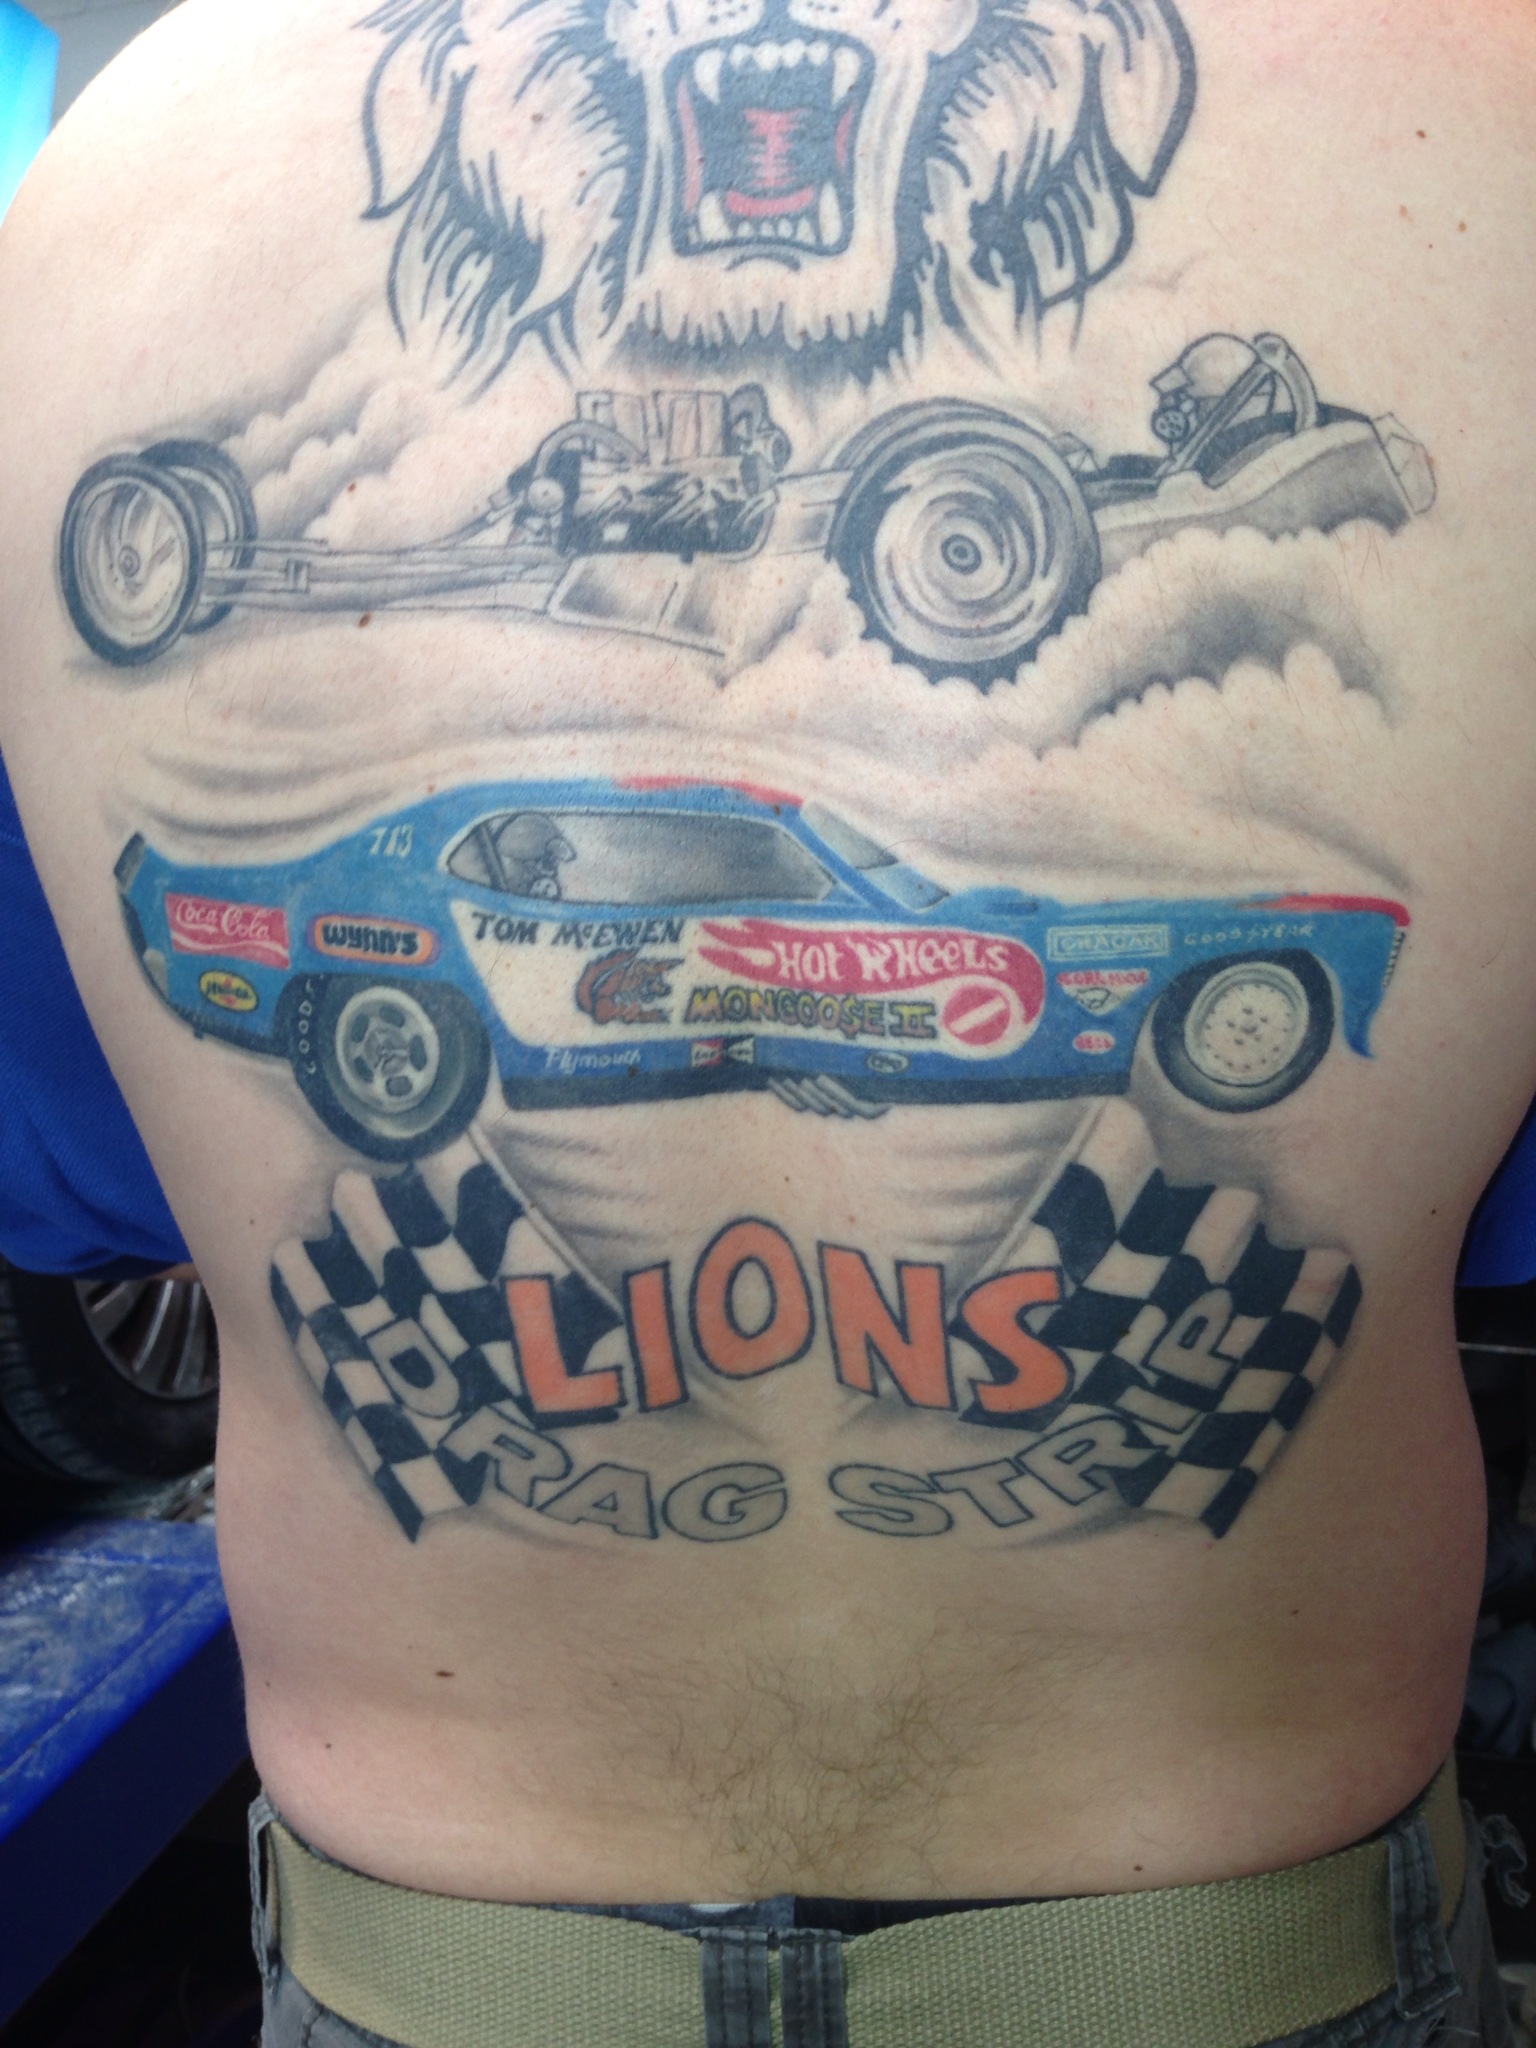 Lui Renzo Tattoos  Some cool car action More to come      tattoo  tattoos tattooing Tattooartist ink skinart art inking tattooed  tattoolife tattooporn artist instagood blackandgreytattoo newjersey  instagram 